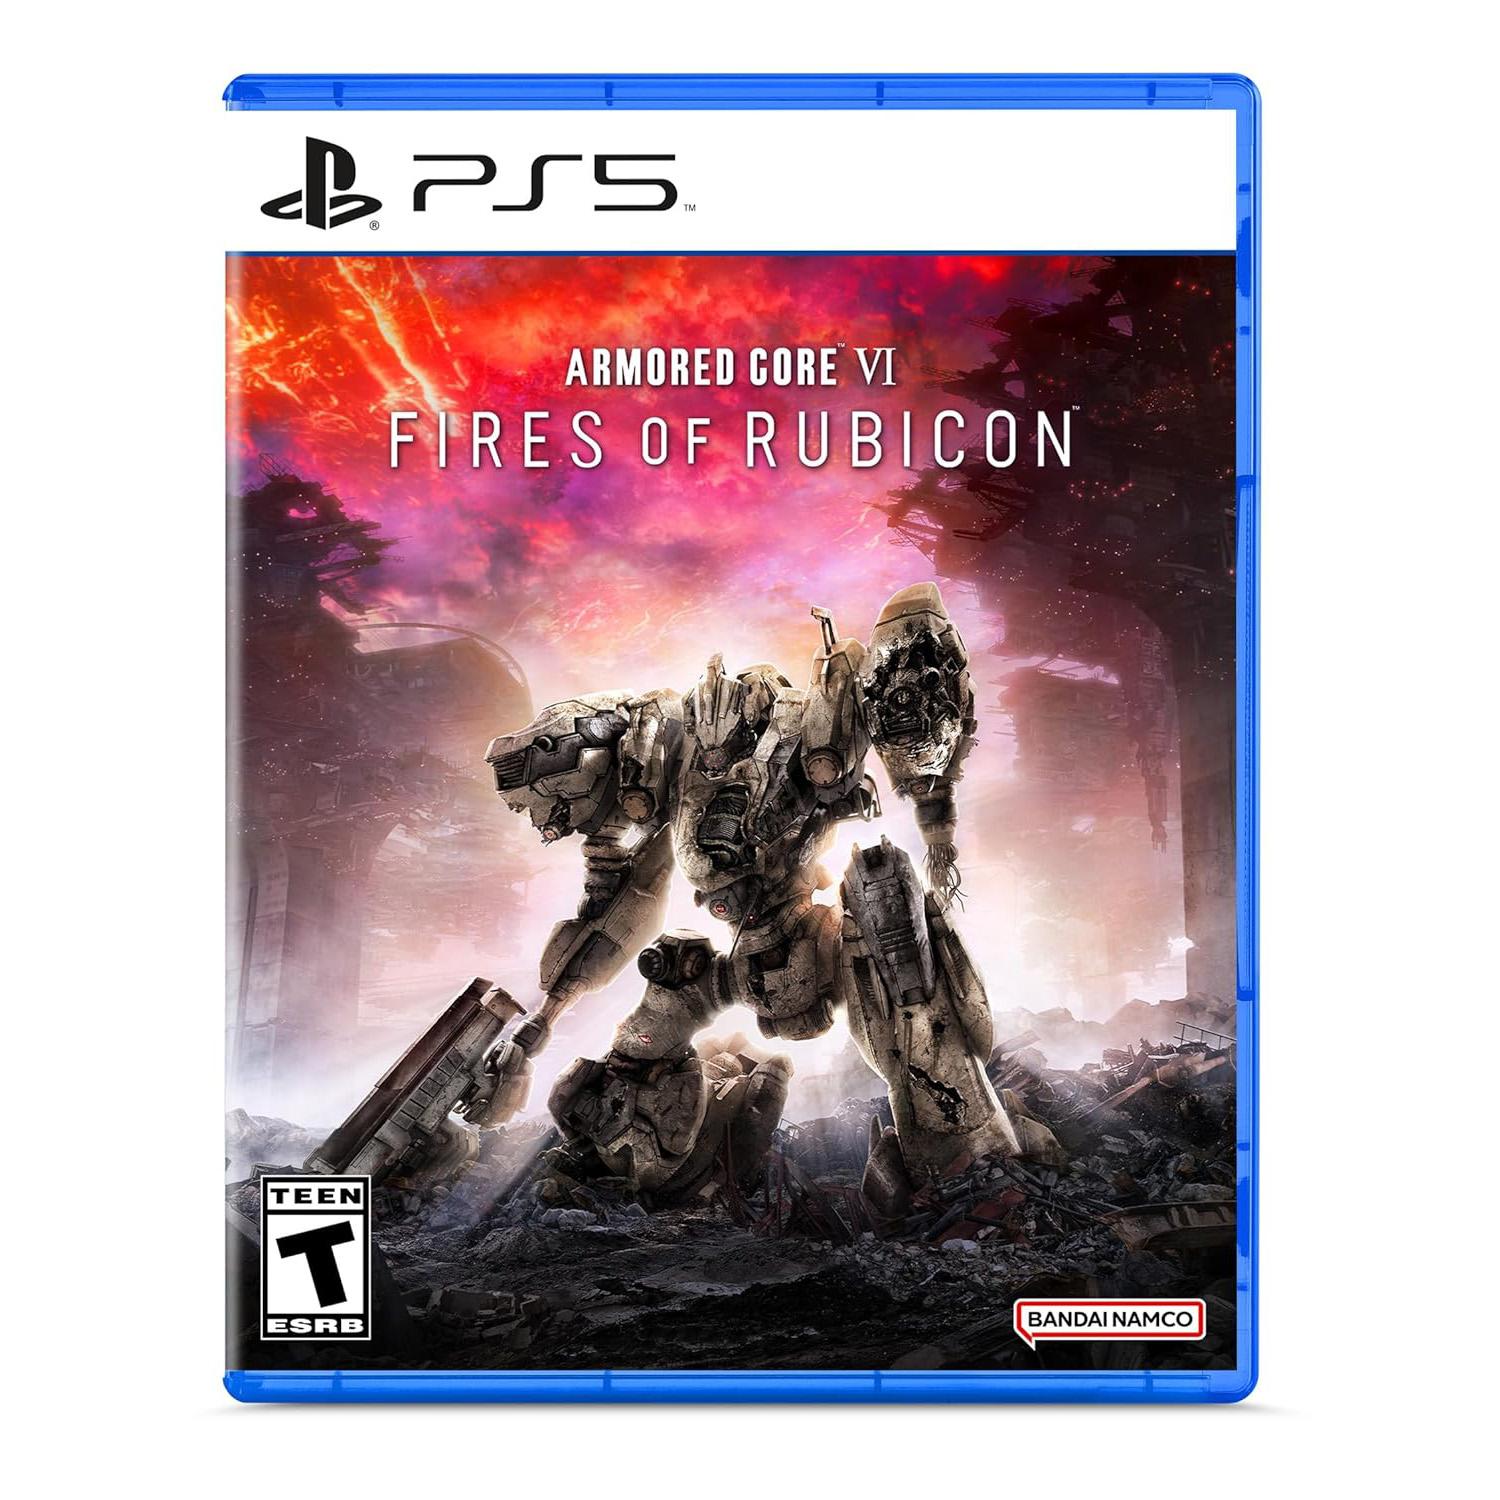 Armored Core VI Fires of Rubicon for Playstation or Xbox for $39.99 Shipped